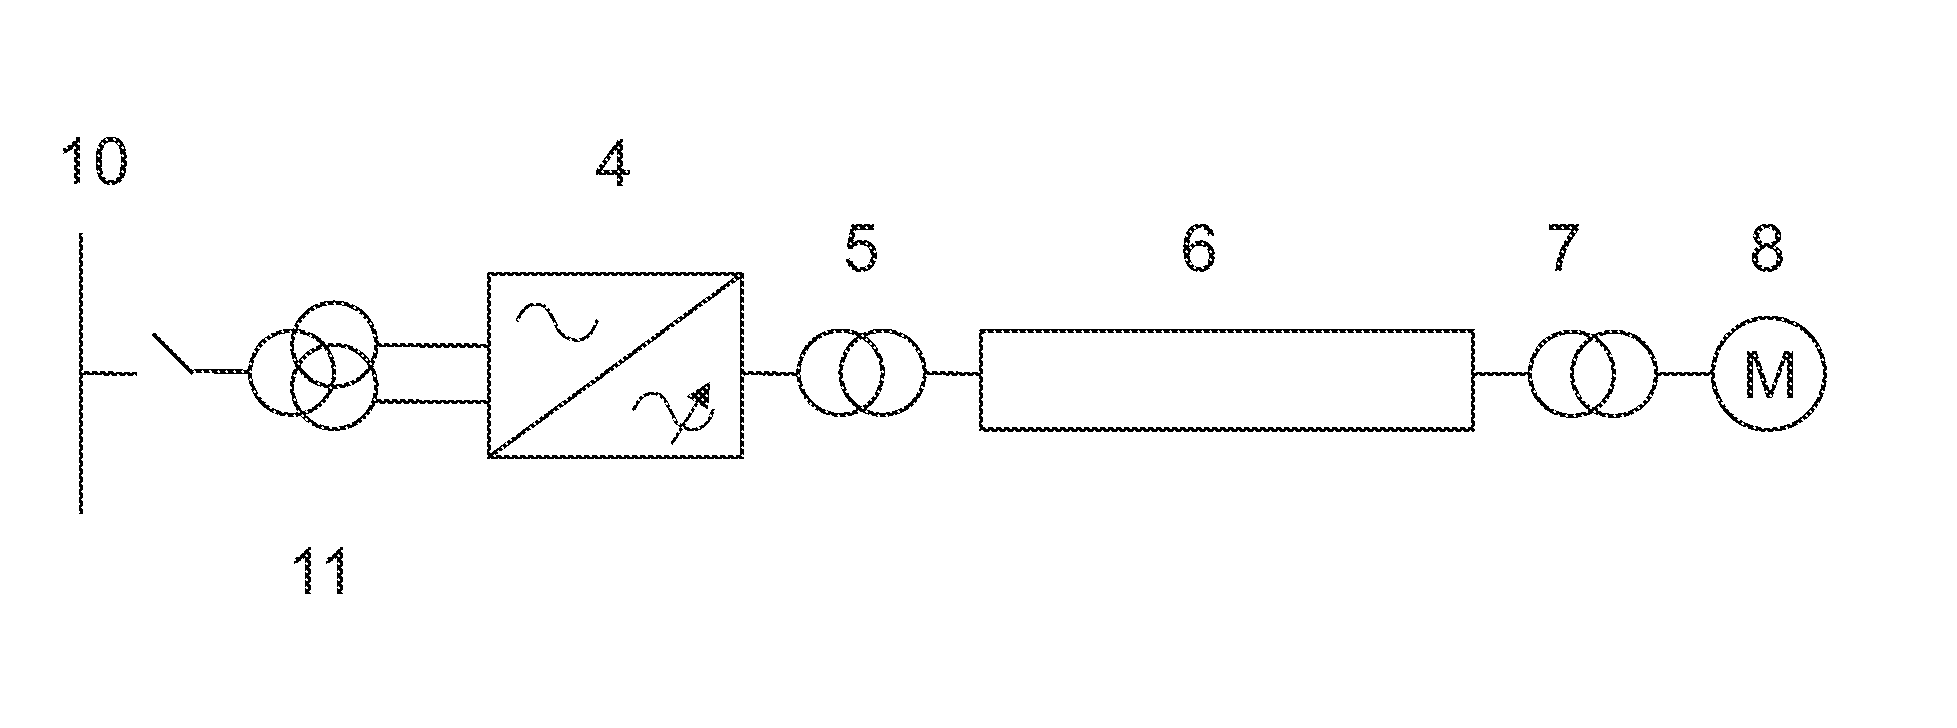 Method For Controlling A Machine Or An Electrical Load Supplied With Electric Power Over A Long Line